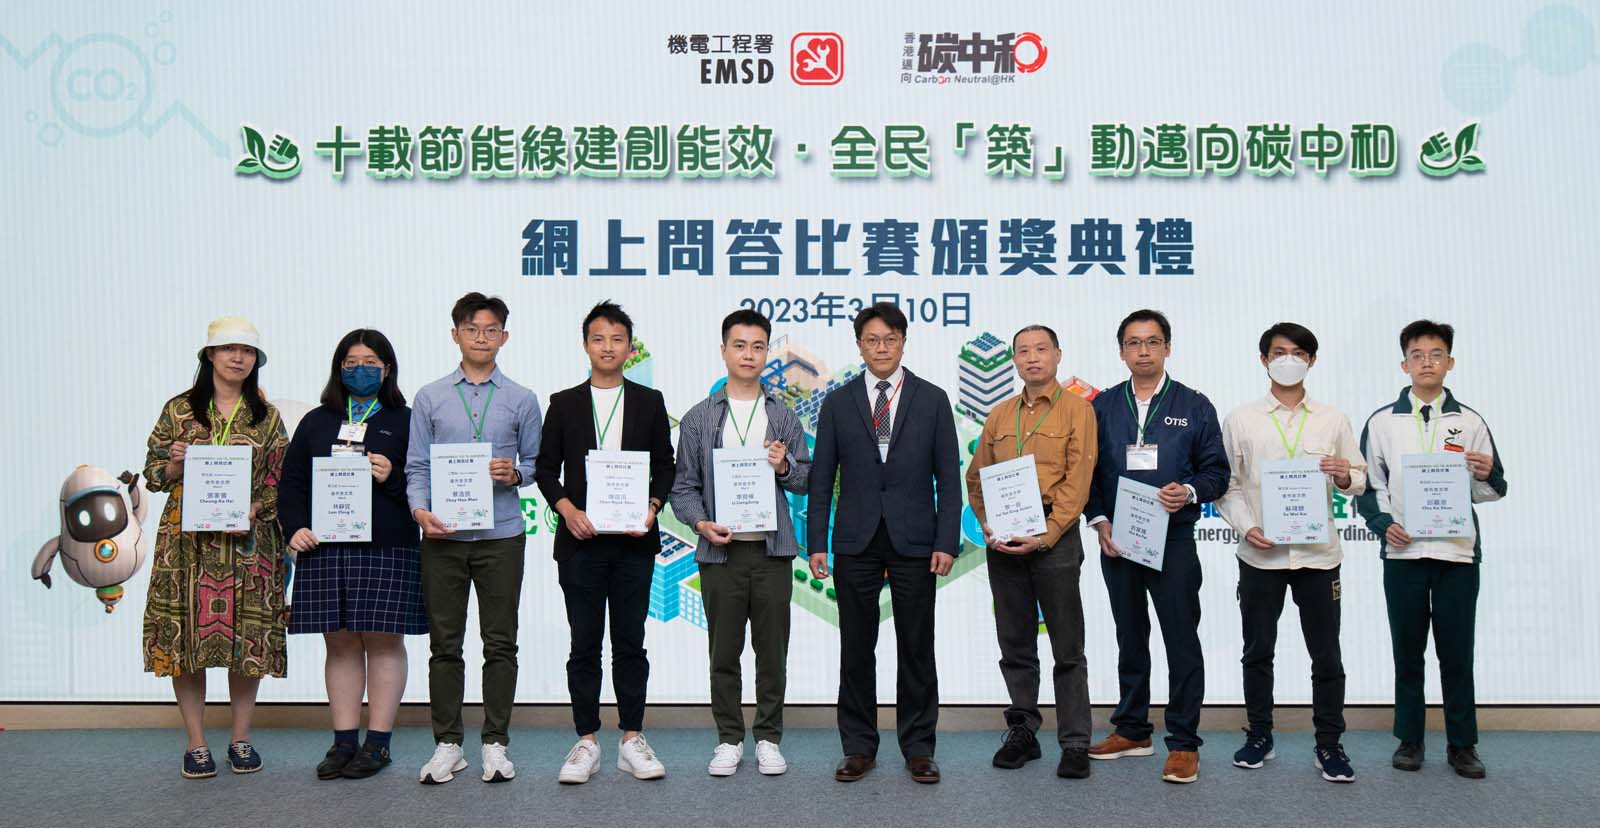 Chairman of the Judging Panel, Ir Prof. Michael LEUNG (fifth from the
                            right) pictured with the winners.